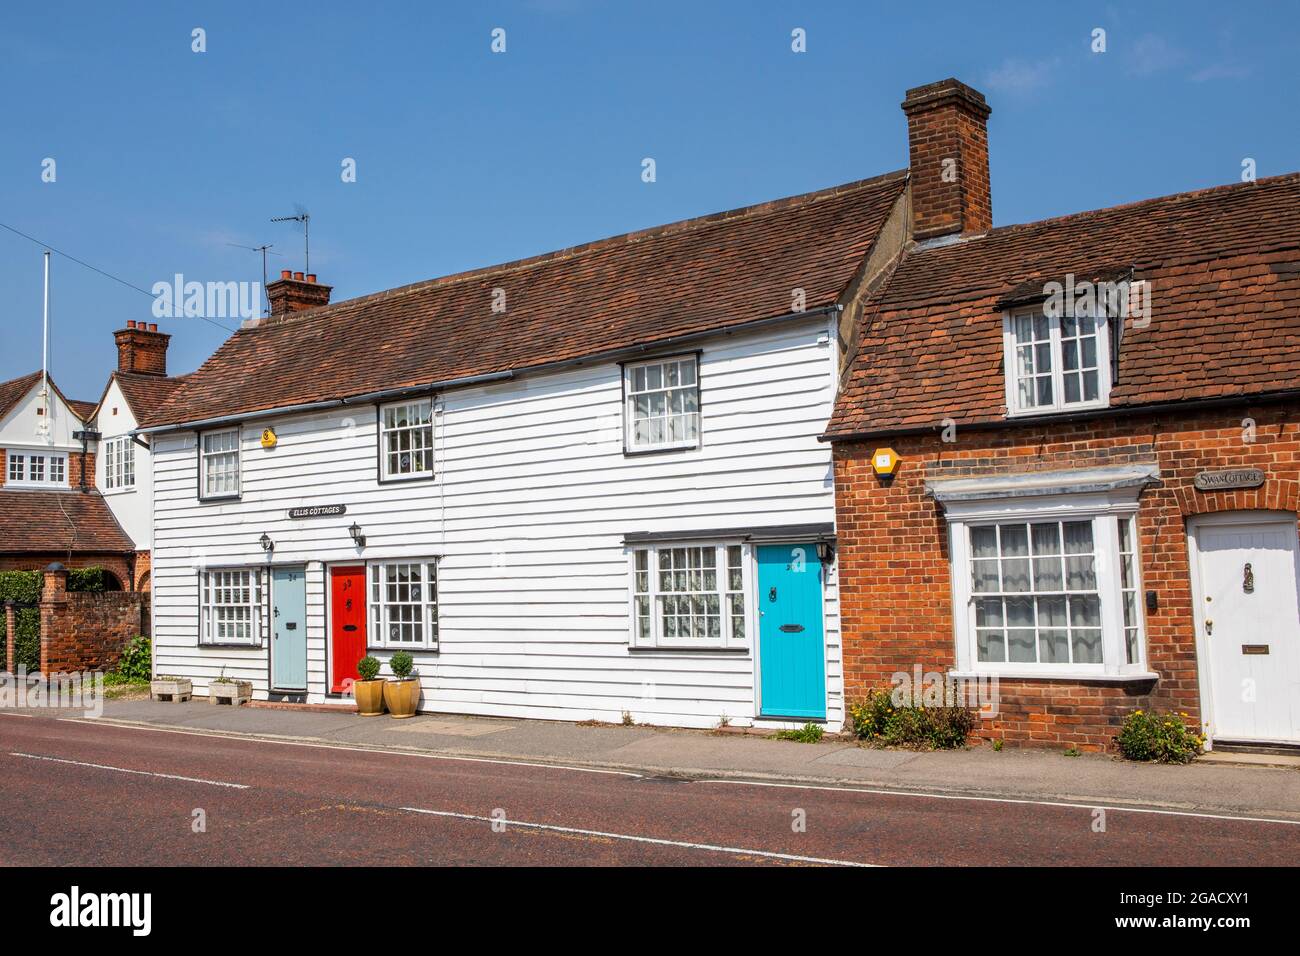 Essex, UK - July 20th 2021: A view of Ellis Cottages in the beautiful village of Stock in Essex, UK. Stock Photo